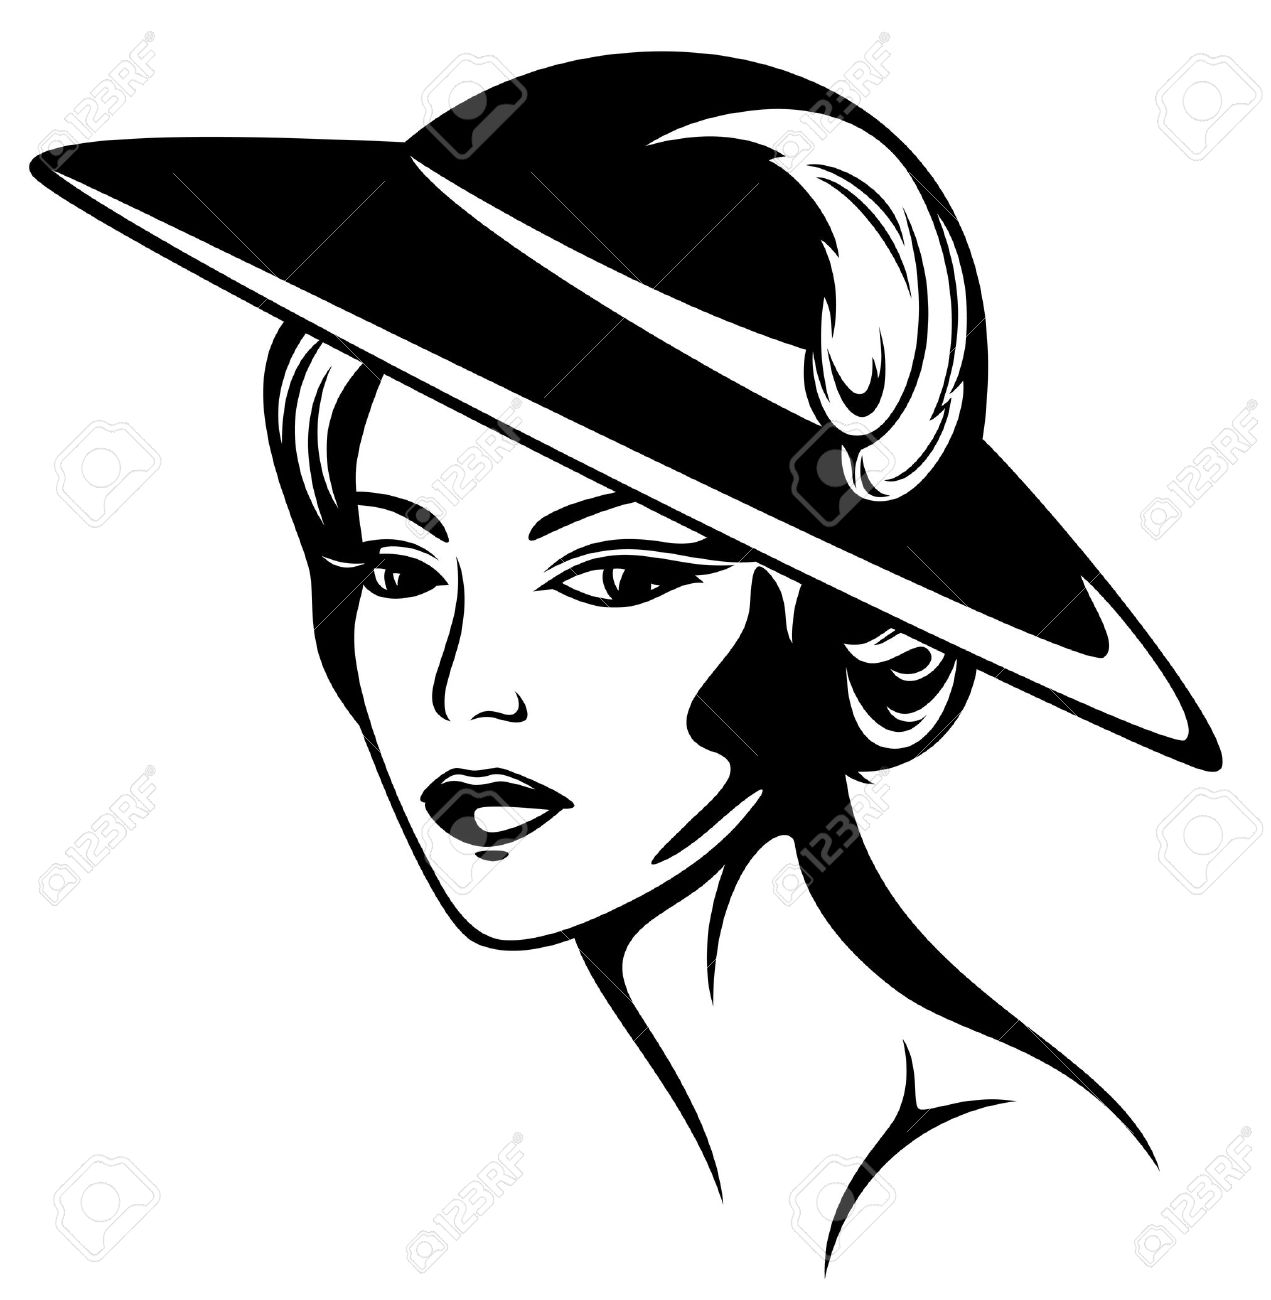 Clipart of girl in hats and scarf black white 